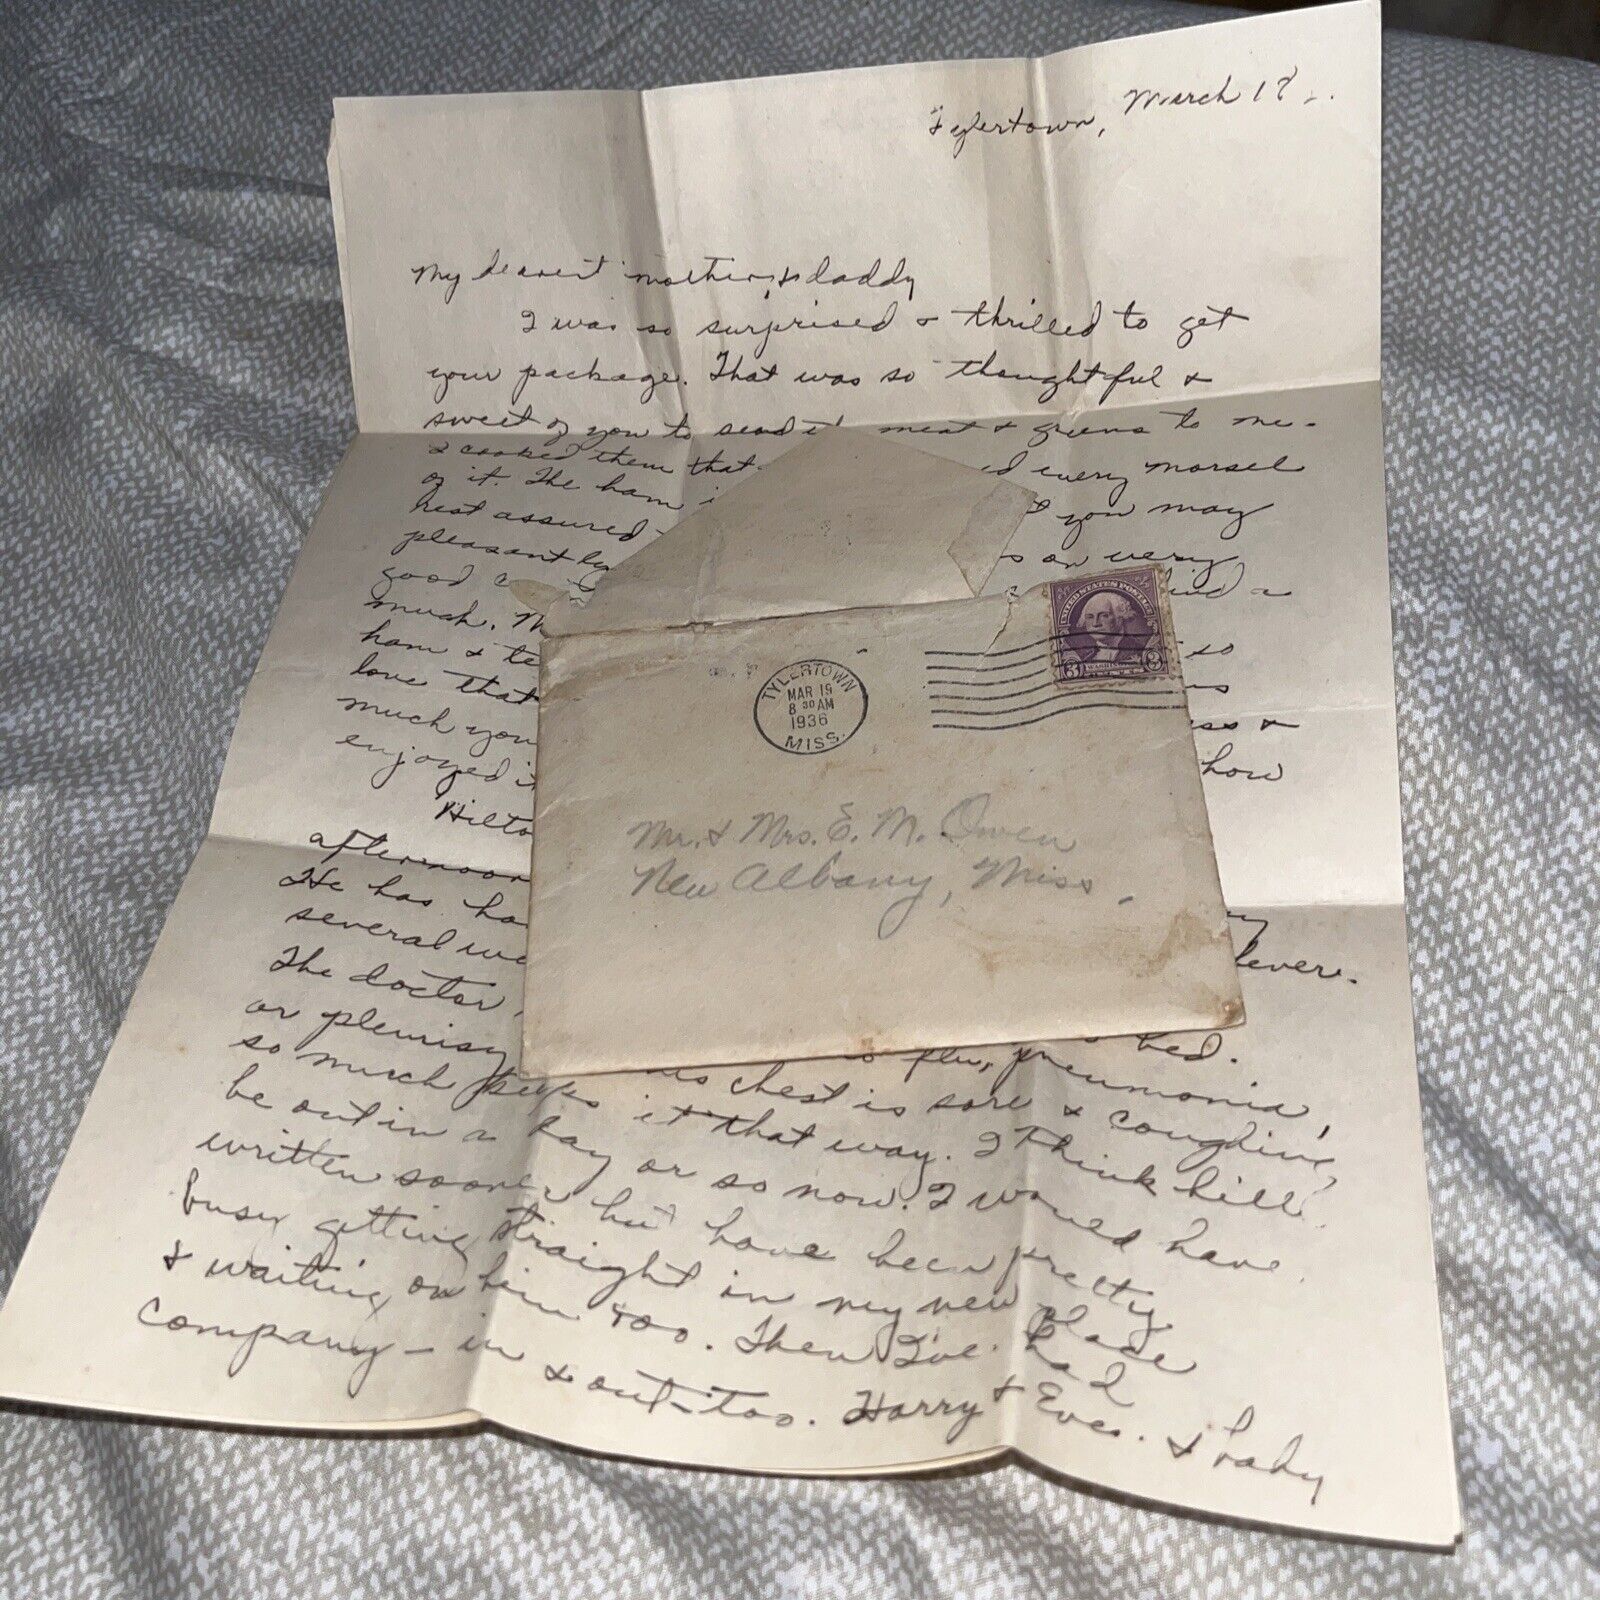 Antique 1936 Great Depression Era Letter Home from MS Discusses New Orleans Trip